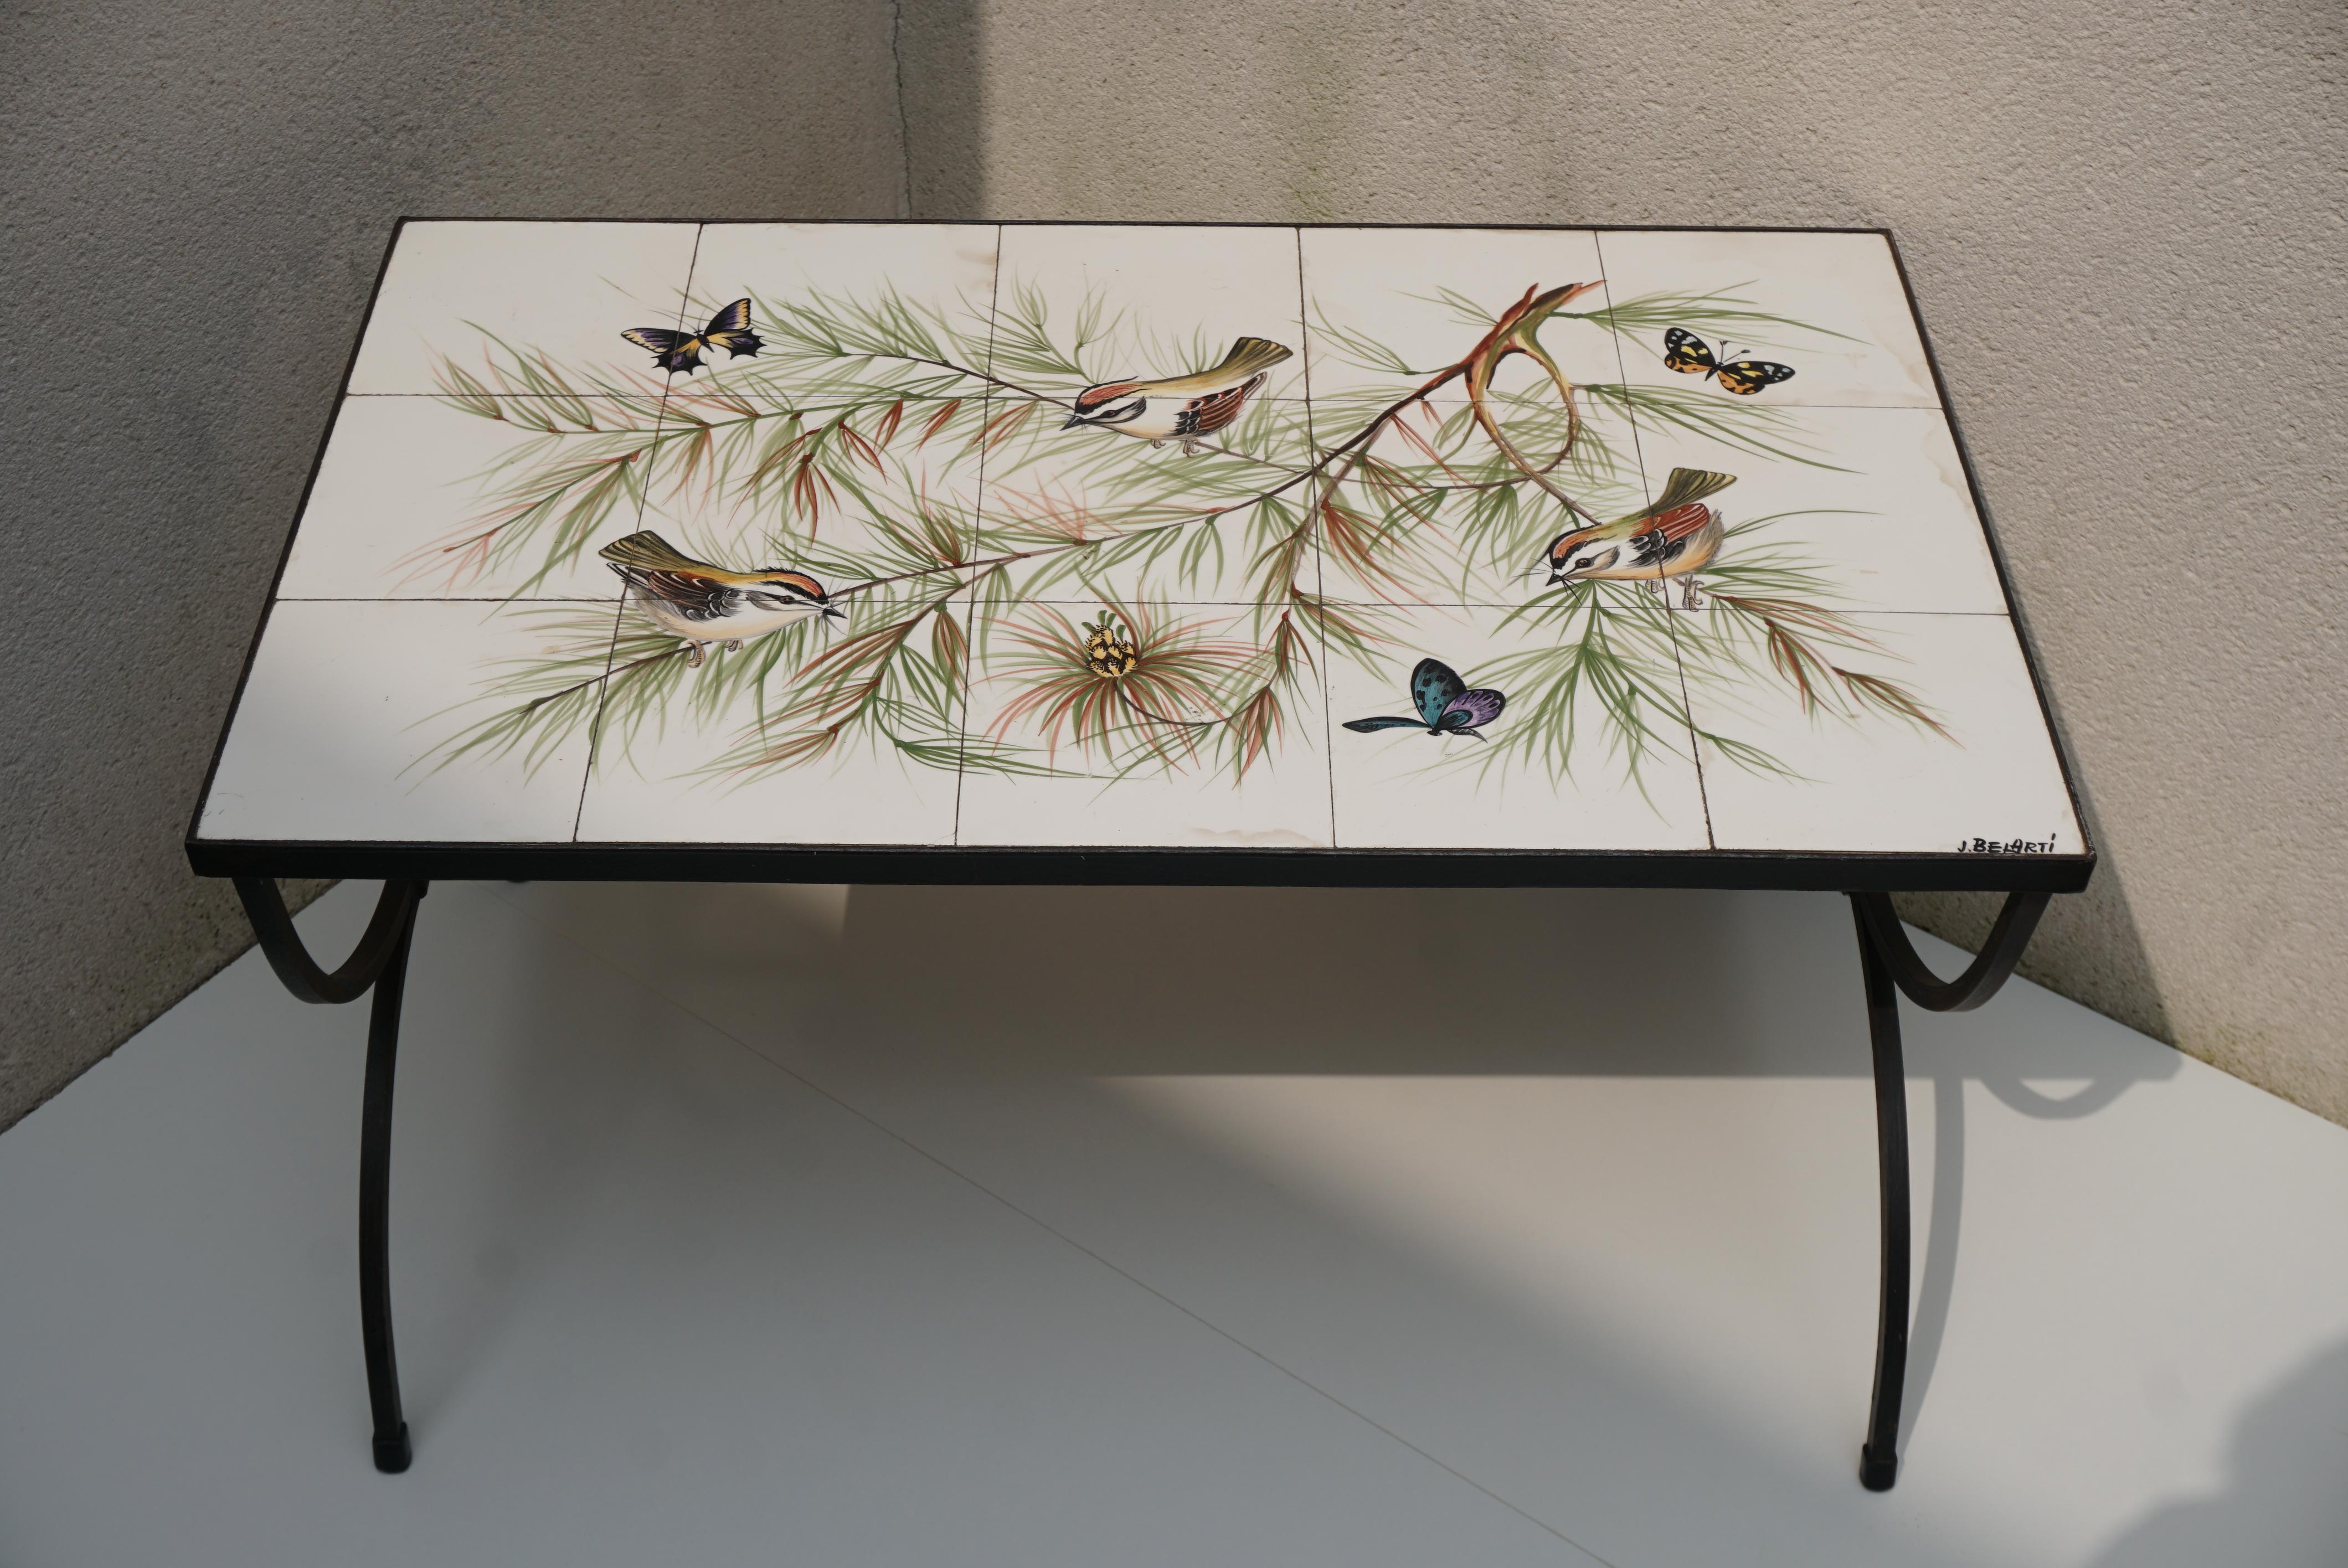 Glazed Belarti Ceramic Tile Side Coffee Table with Birds and Butterflies, 1960s For Sale